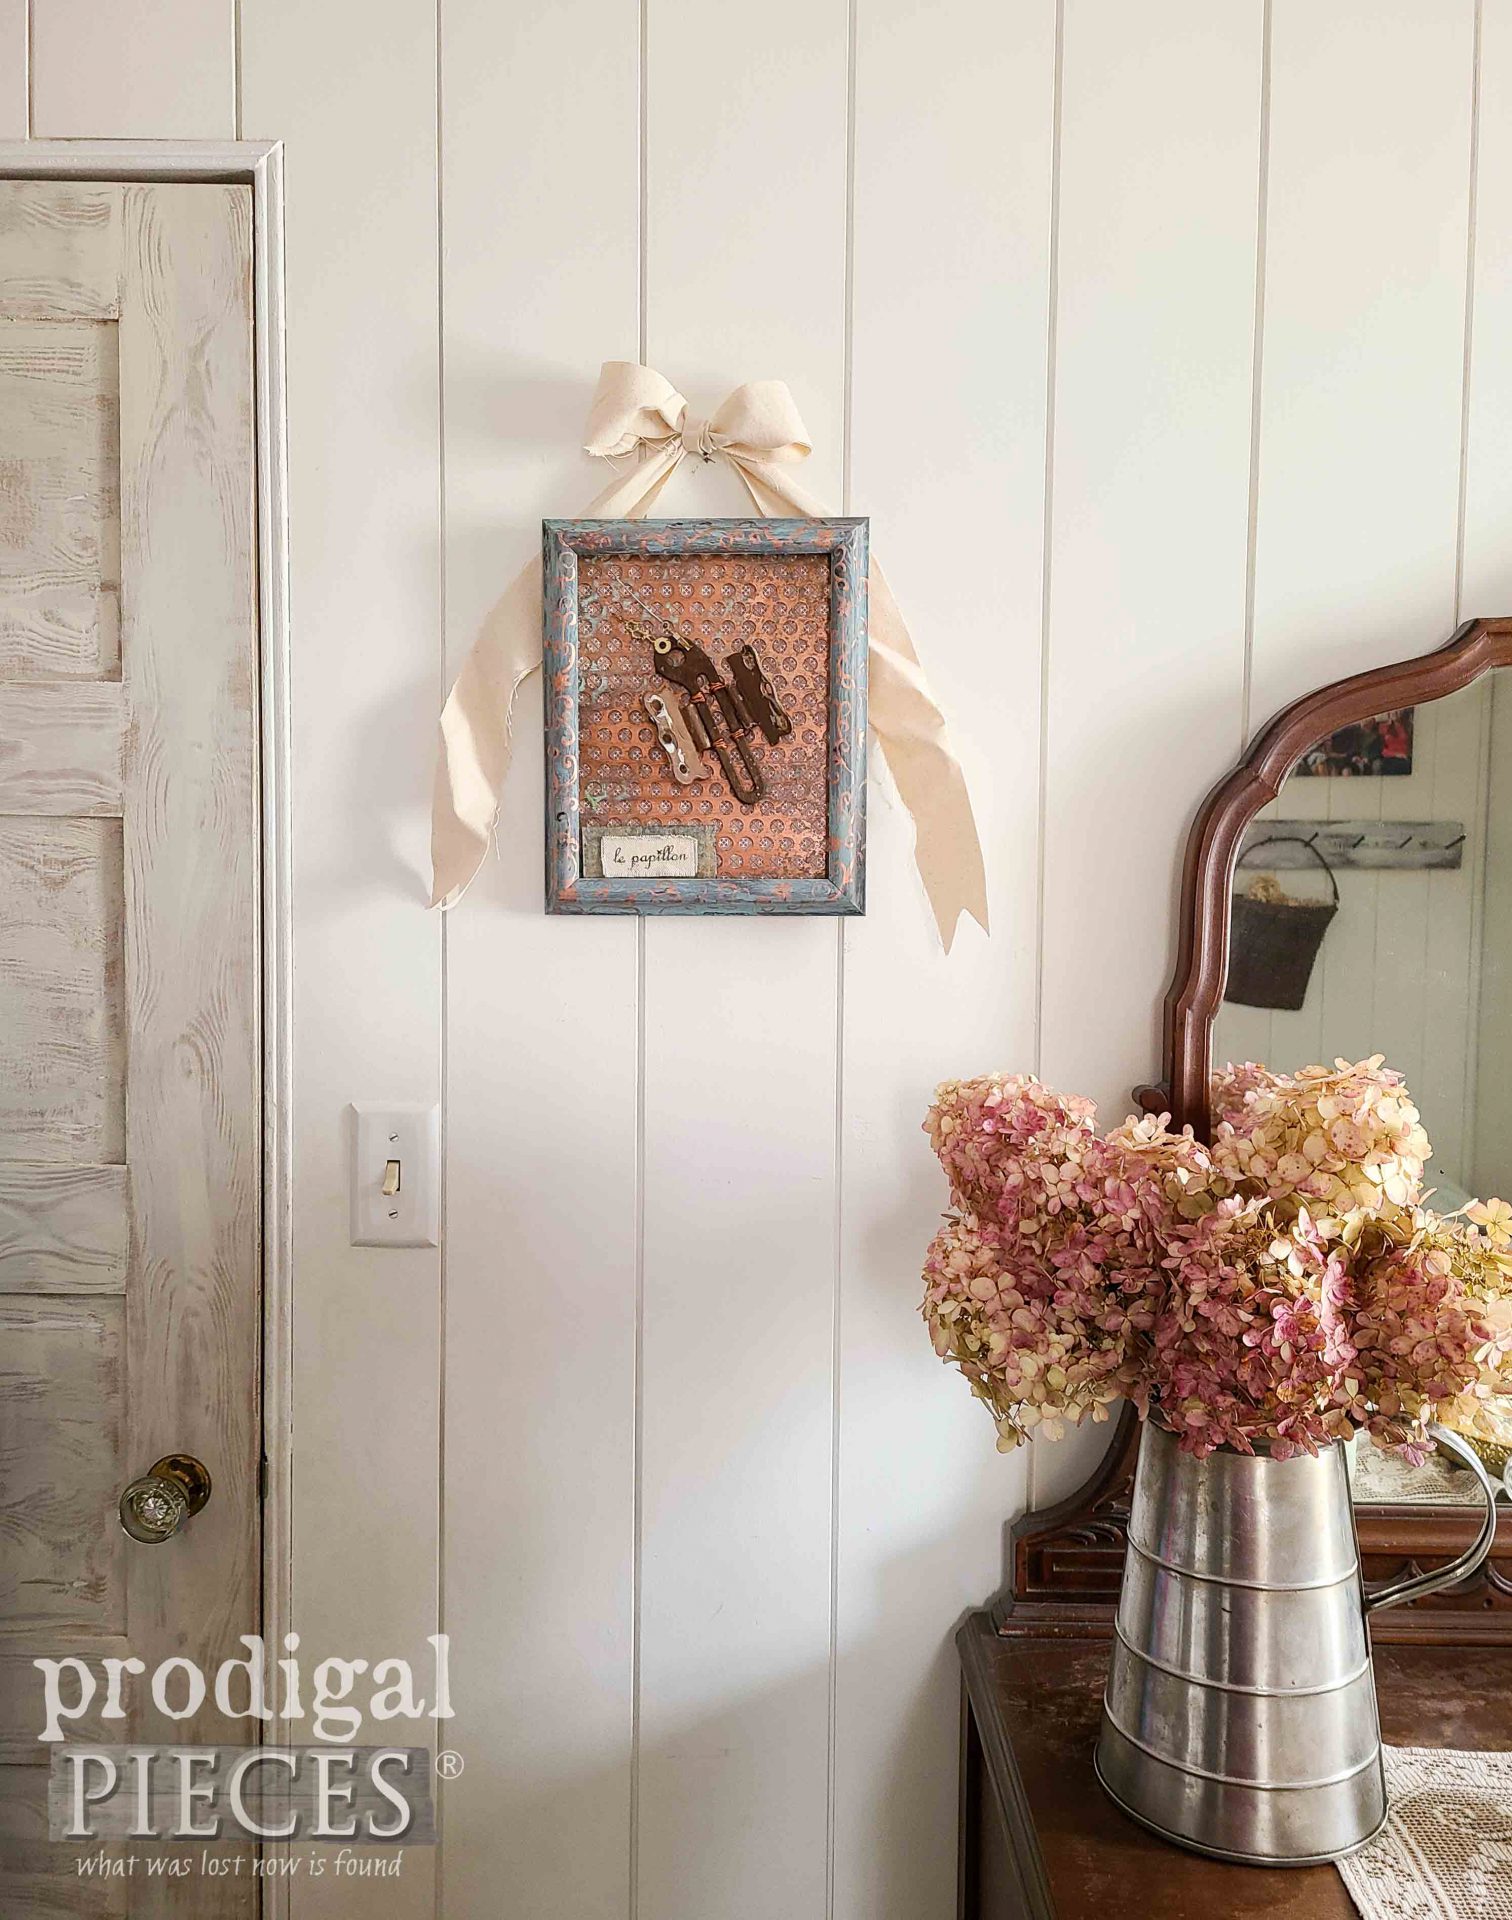 DIY Thrifted Picture Frame Butterfly Art by Larissa of Prodigal Pieces | prodigalpieces.com #prodigalpieces #diy #art #upcycled #salvaged